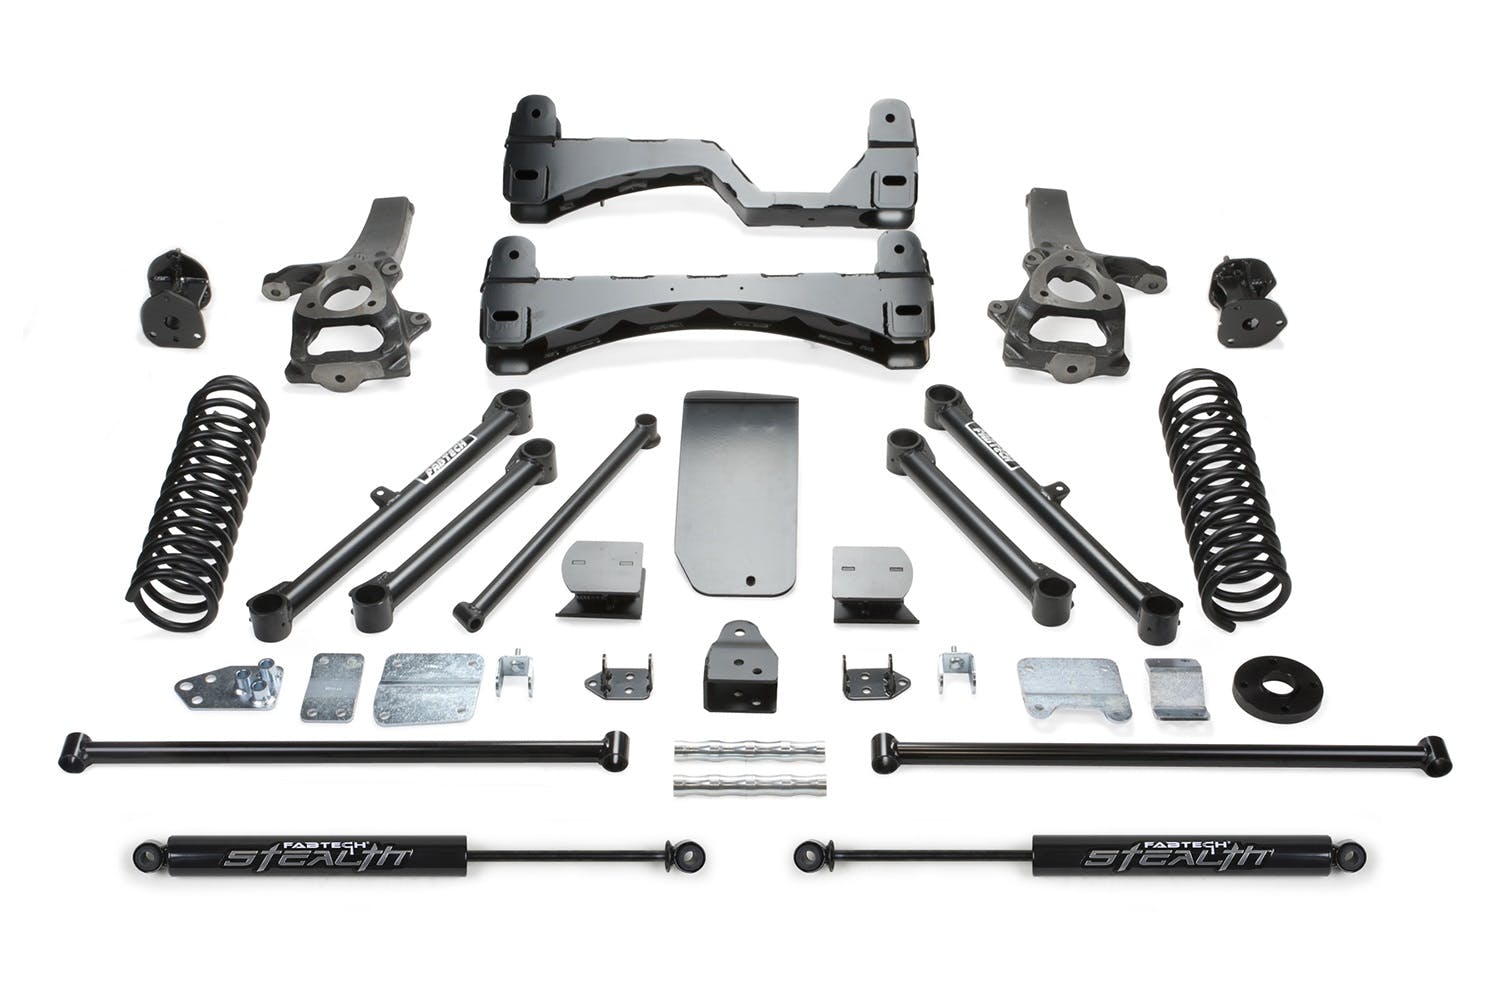 Fabtech K3054M 6in. BASIC SYS W/STEALTH 2012 RAM 1500 4WD